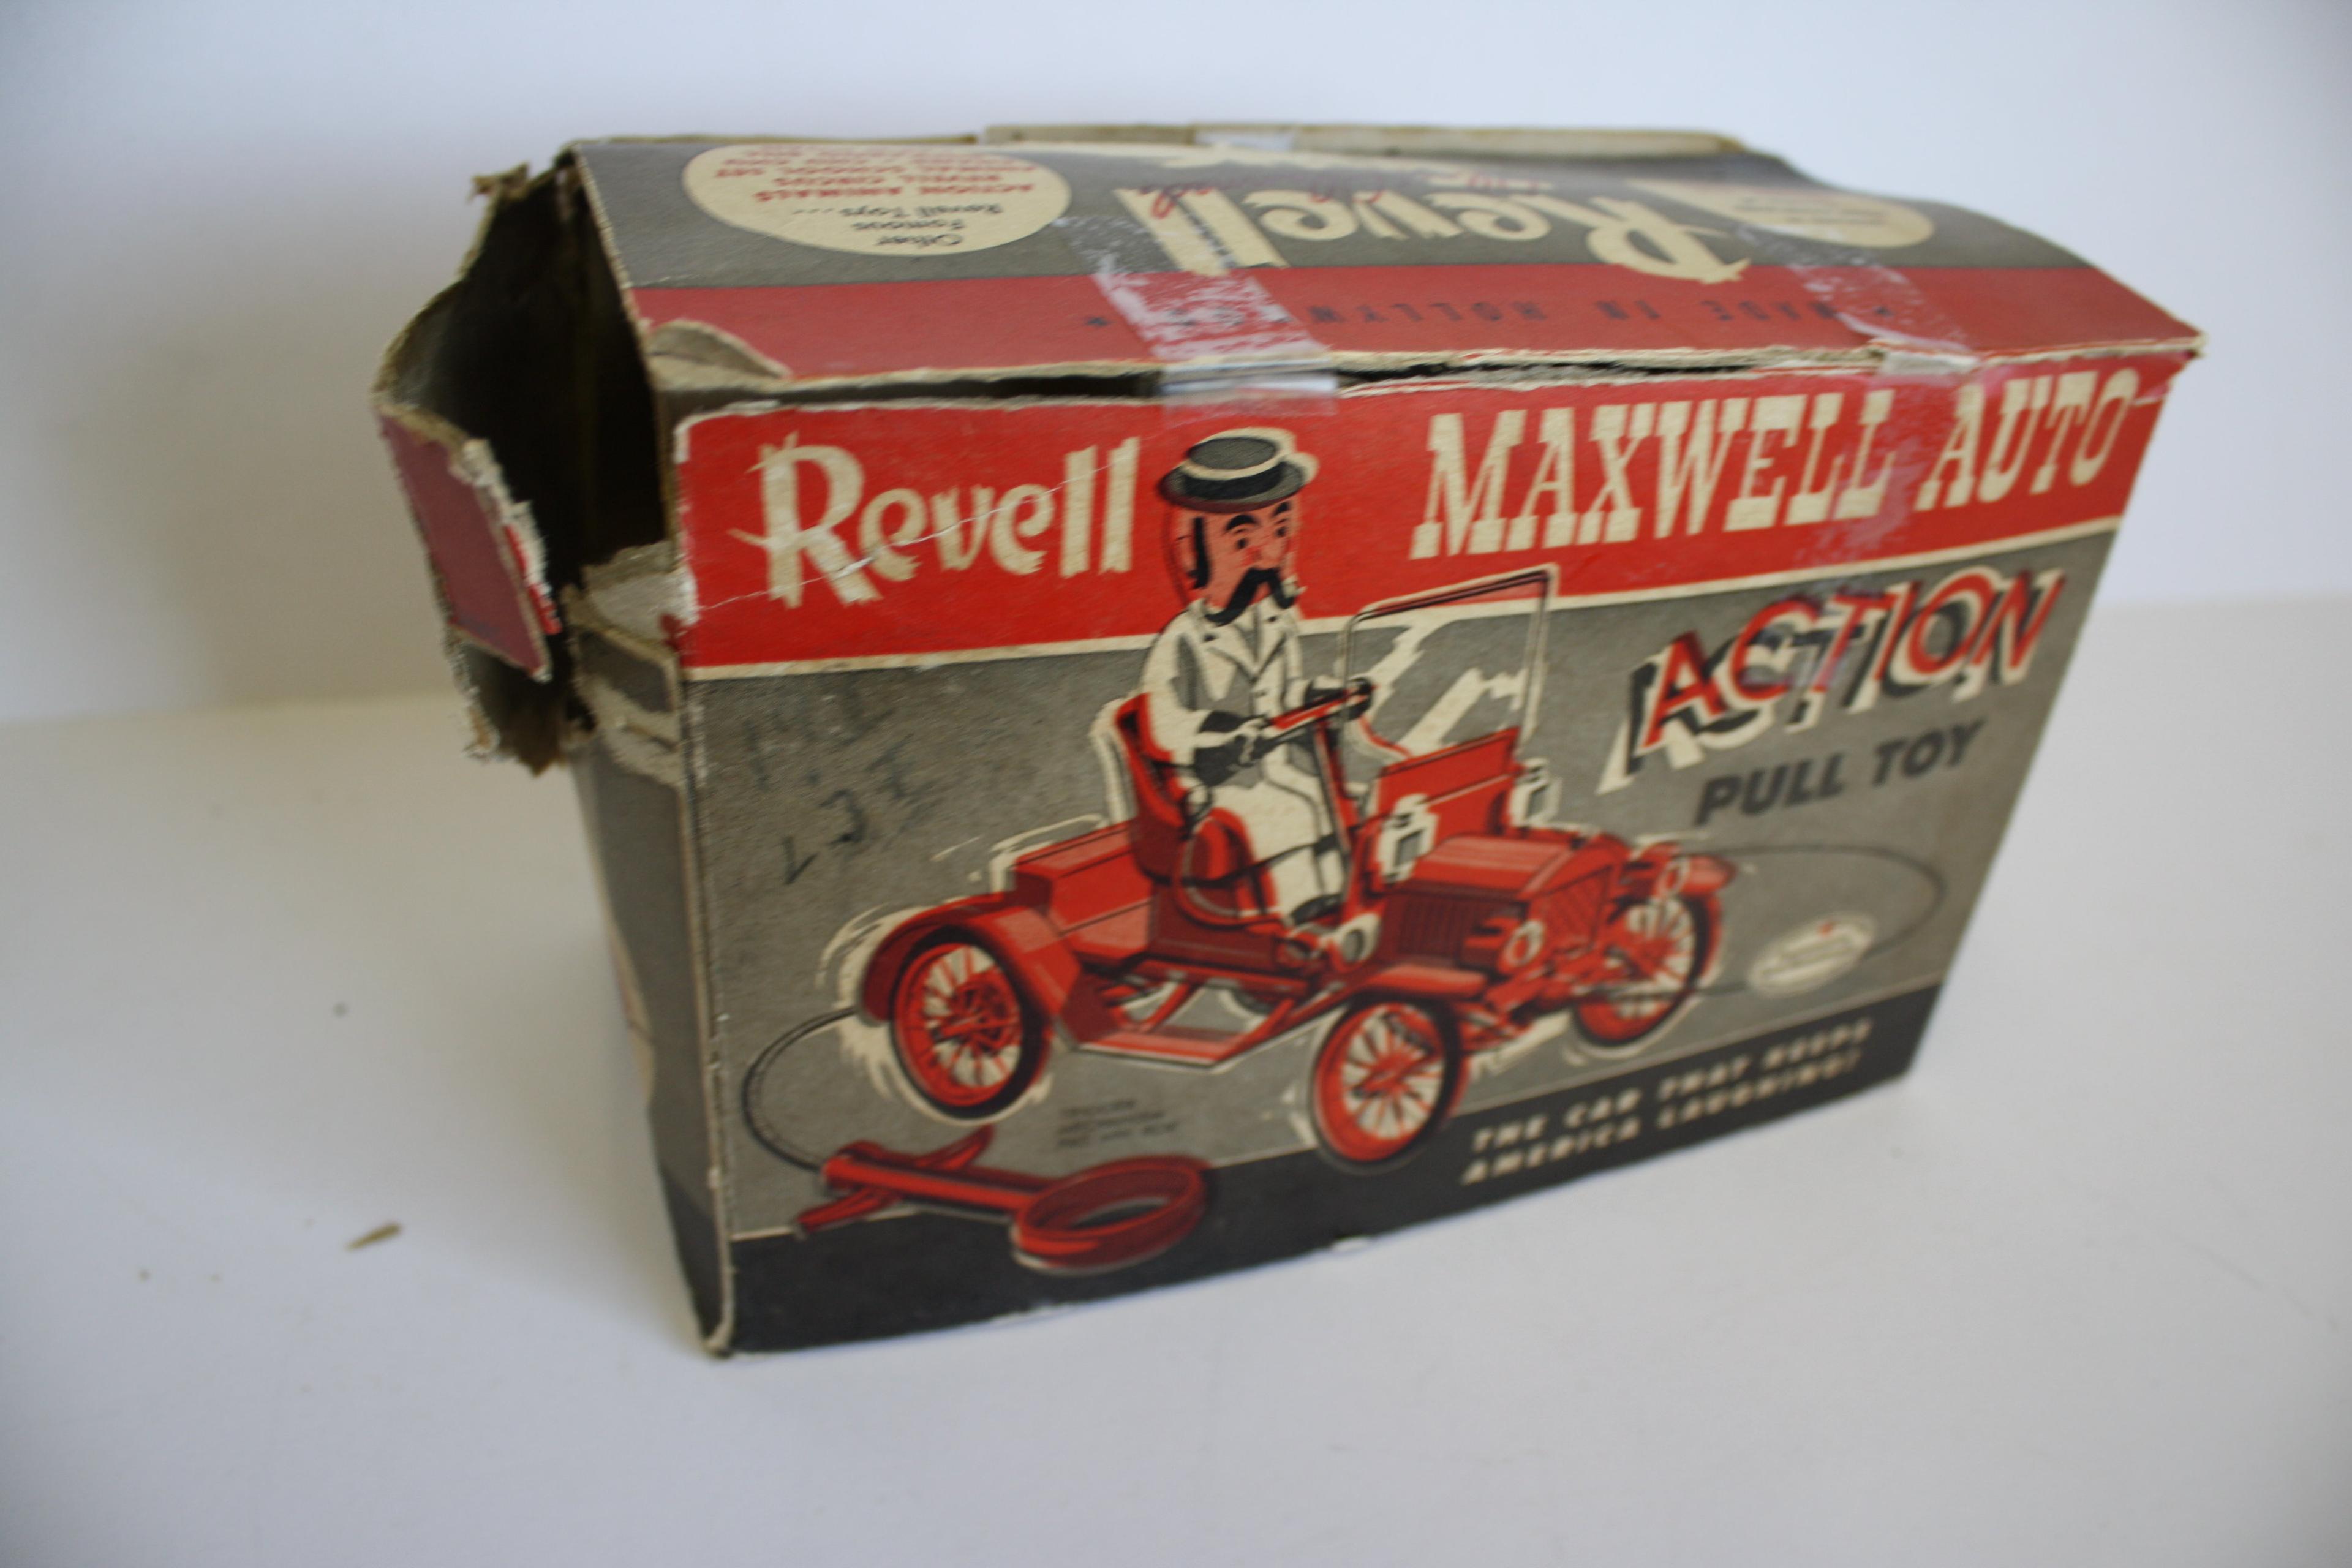 Revell Maxwell Auto Action Pull Toy